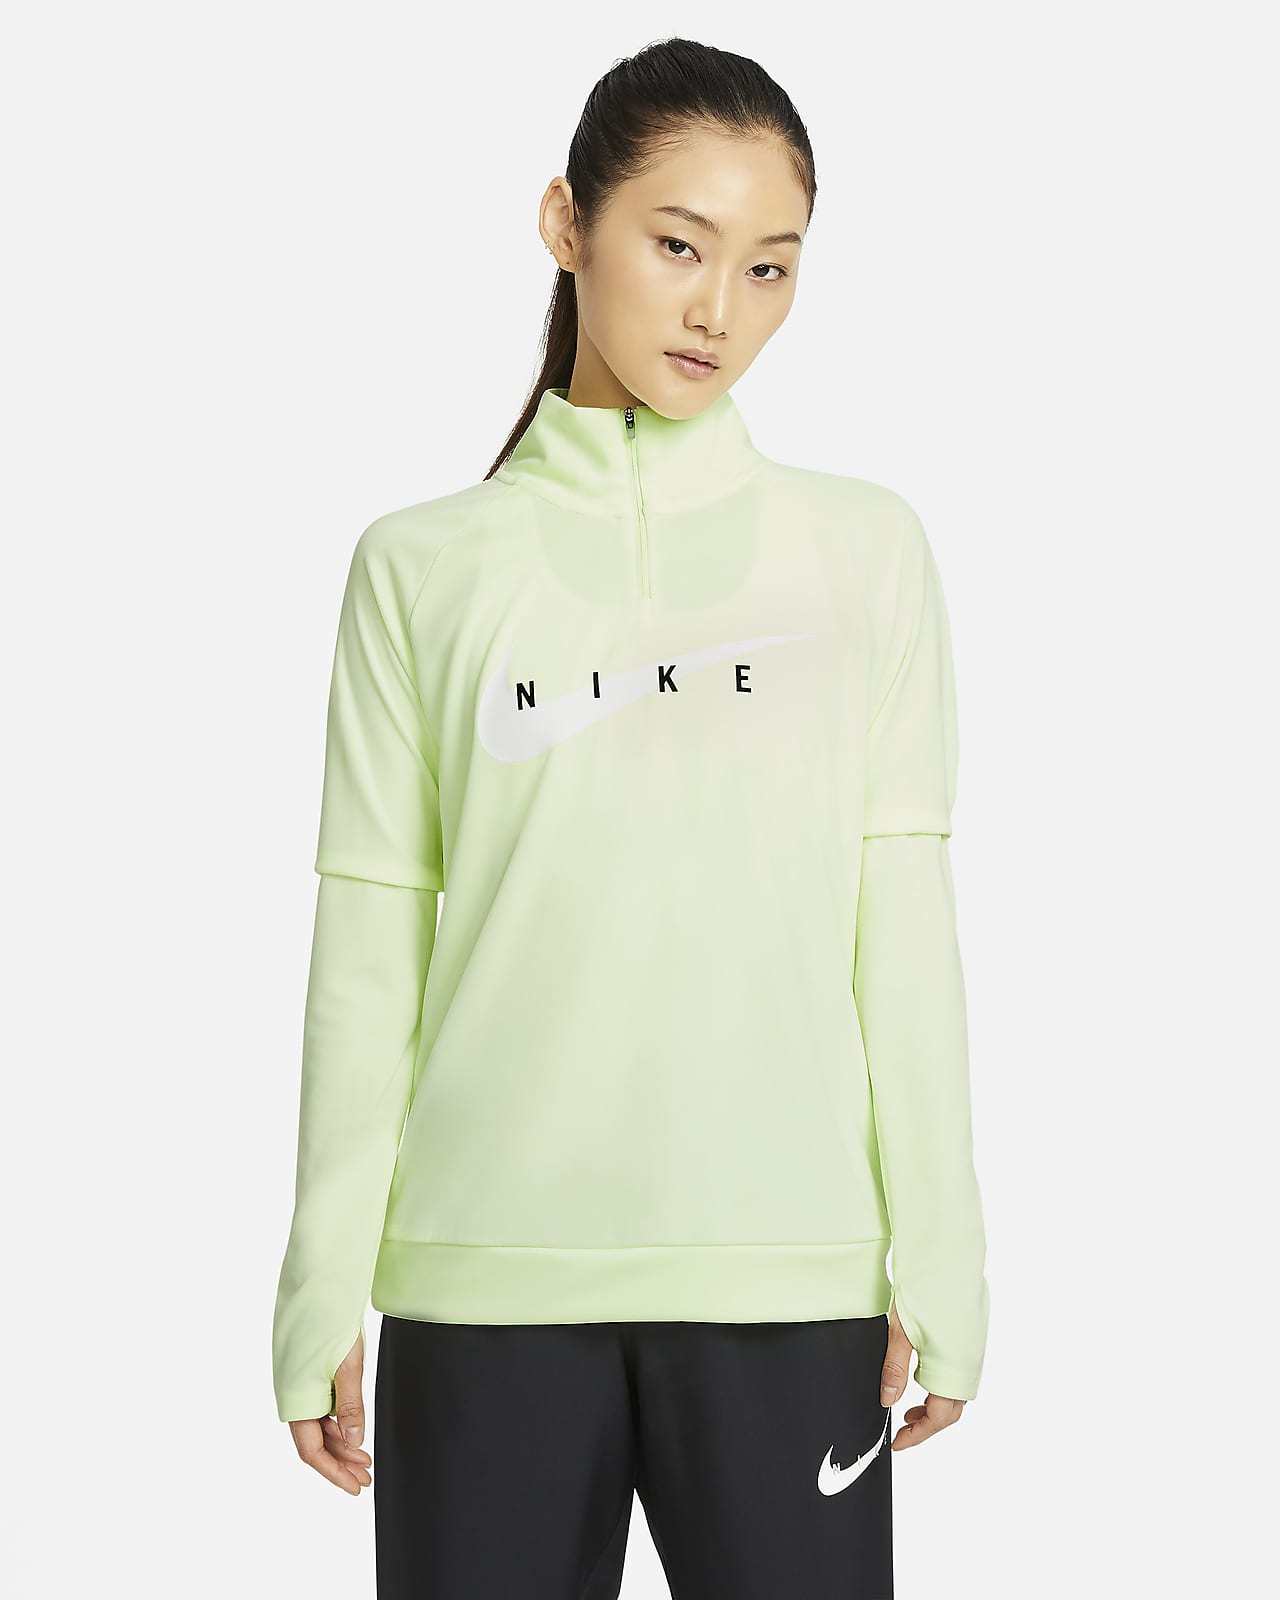 womans nike running top